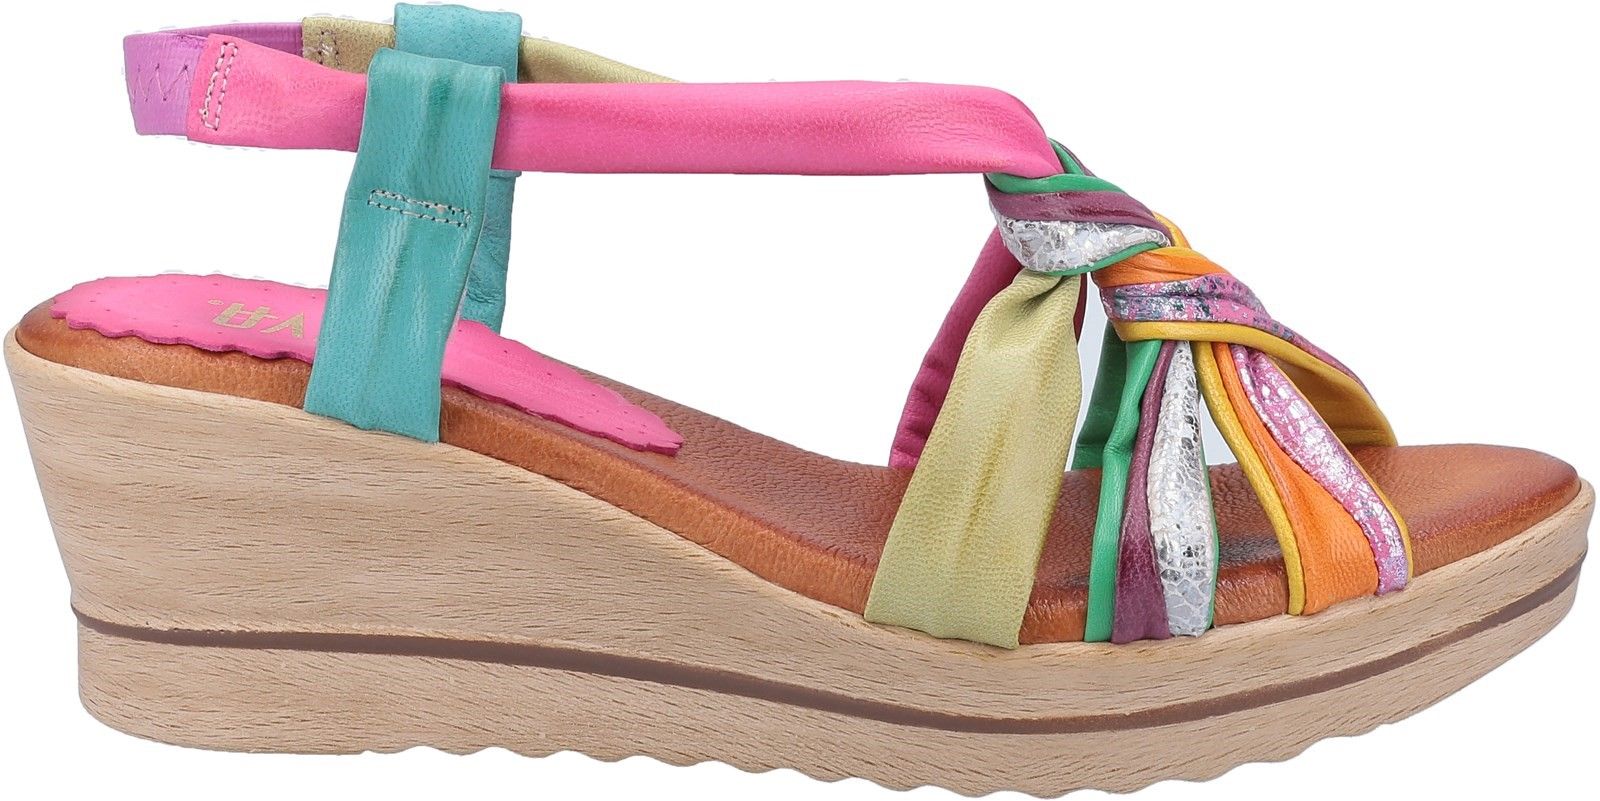 Riva Perpignan is a womens slip on slingback summer sandal with wedge heel, platform sole and soft, plait detail leather uppers.